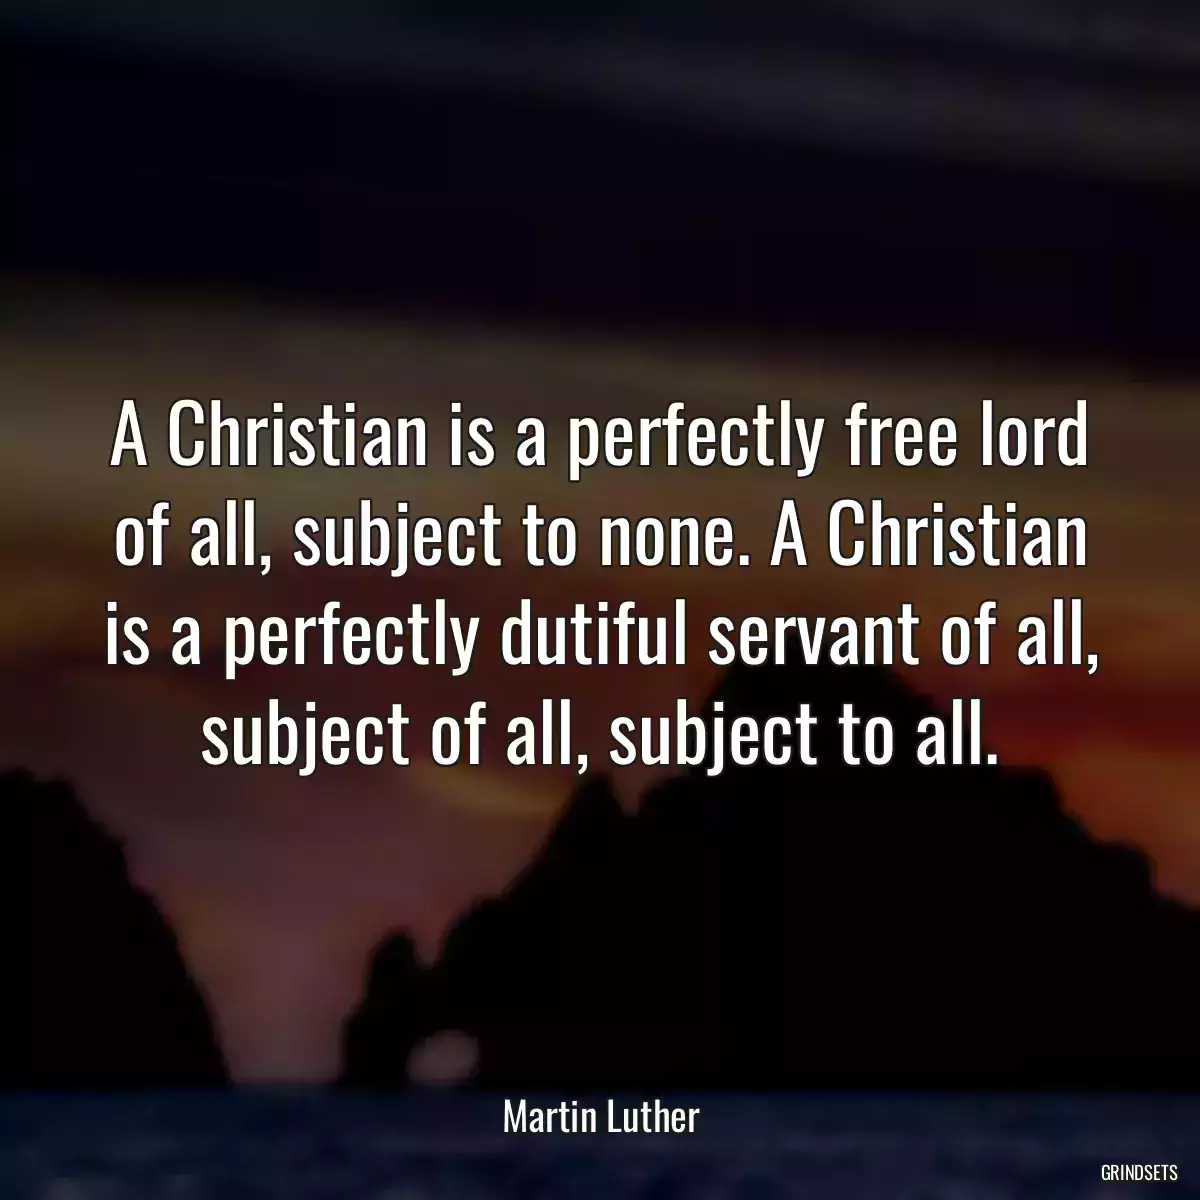 A Christian is a perfectly free lord of all, subject to none. A Christian is a perfectly dutiful servant of all, subject of all, subject to all.